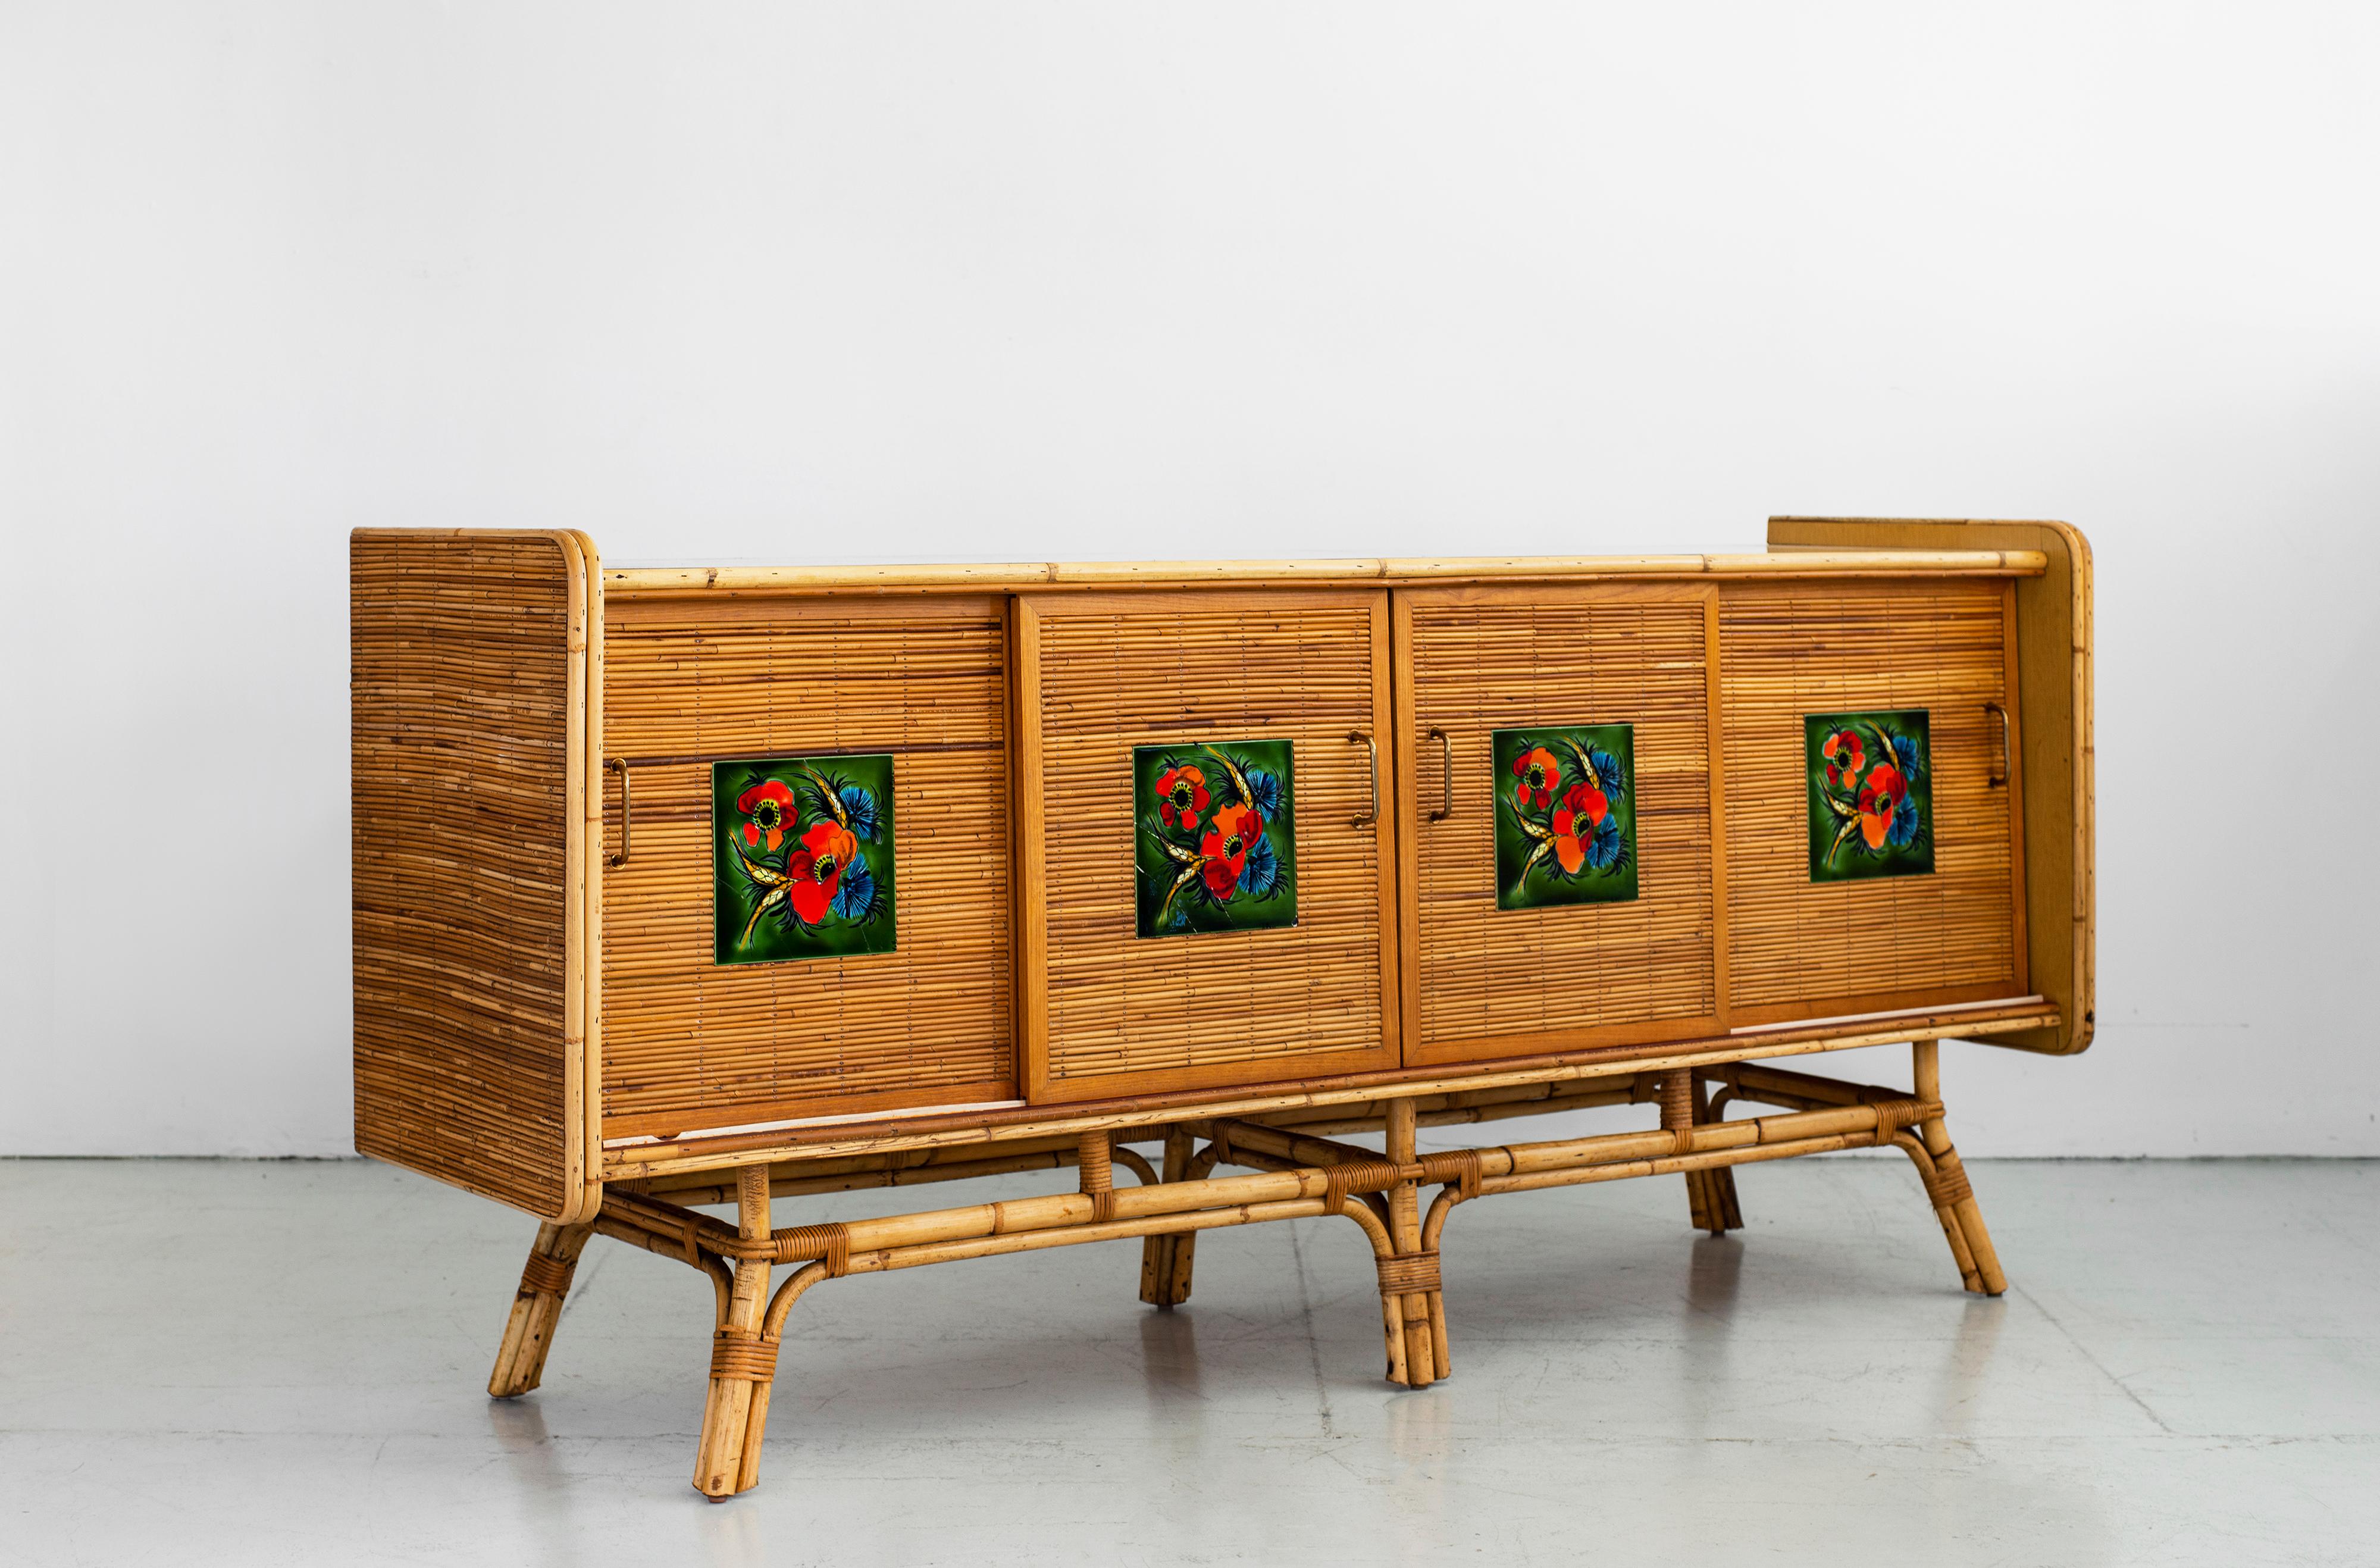 Beautiful French rattan sideboard by Adrien Audoux and Frida Minet, circa 1960s. Made of rattan wood on sides and front with floating rattan base and laminate wood top. Rattan sliding doors have hand painted floral ceramic tile detail which open to